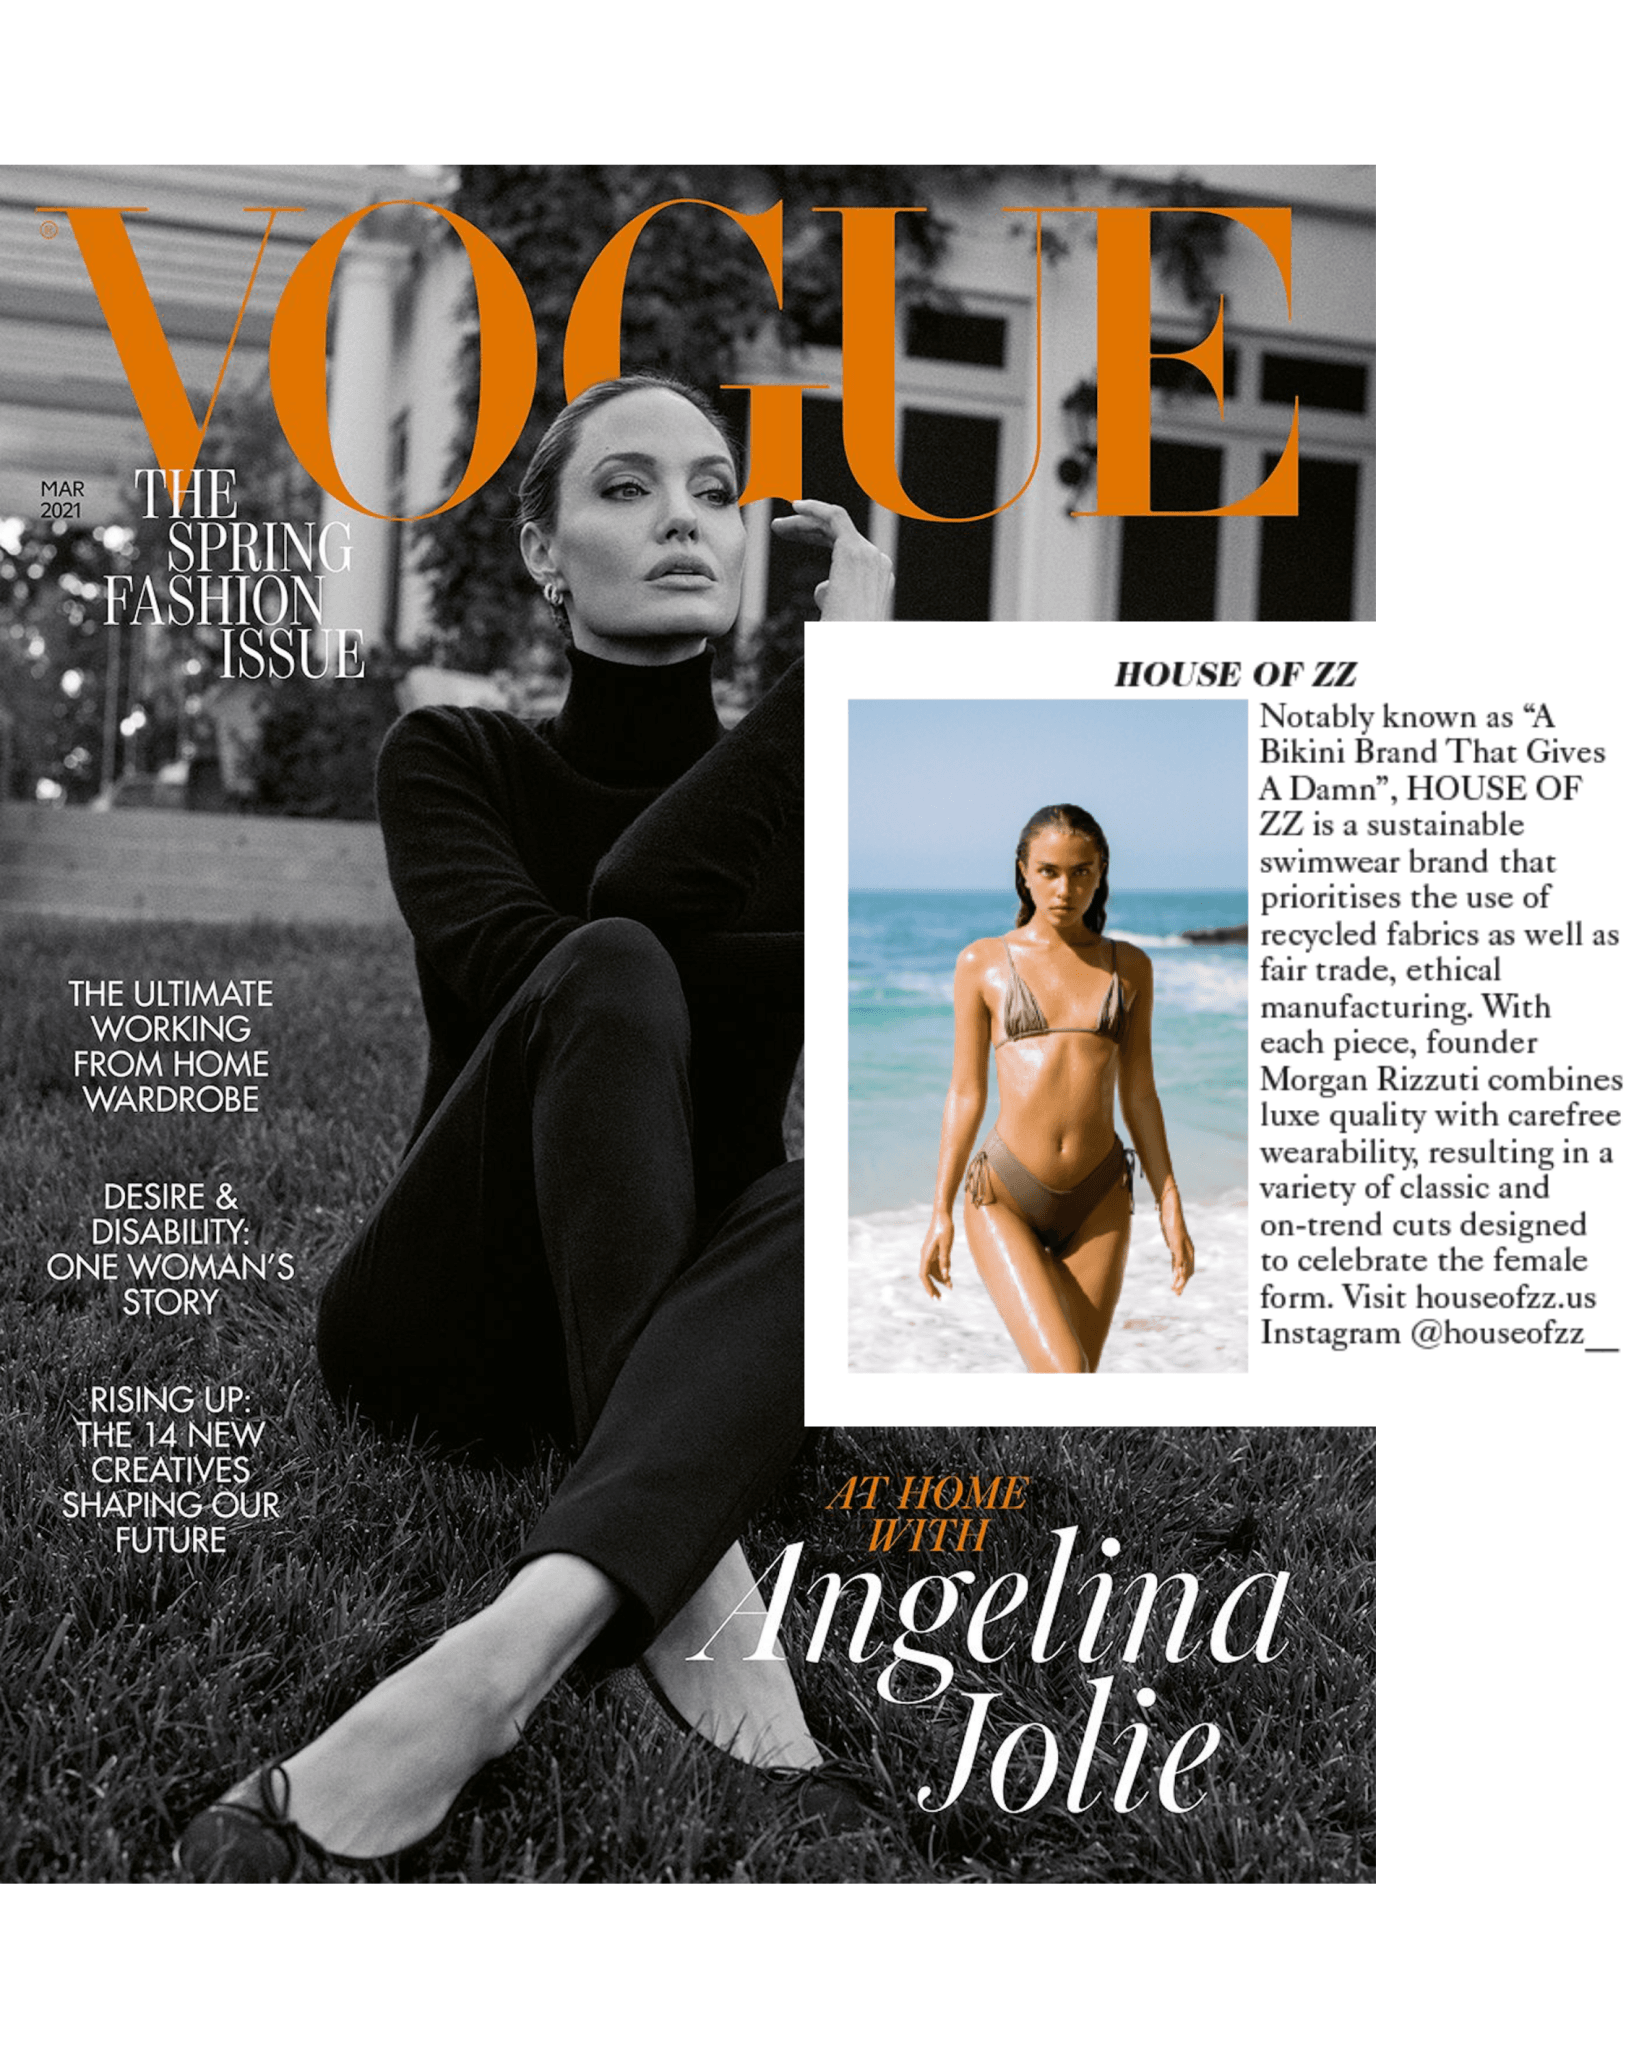 BRITISH VOGUE: March 2021 Print Issue - HOUSE OF ZZ